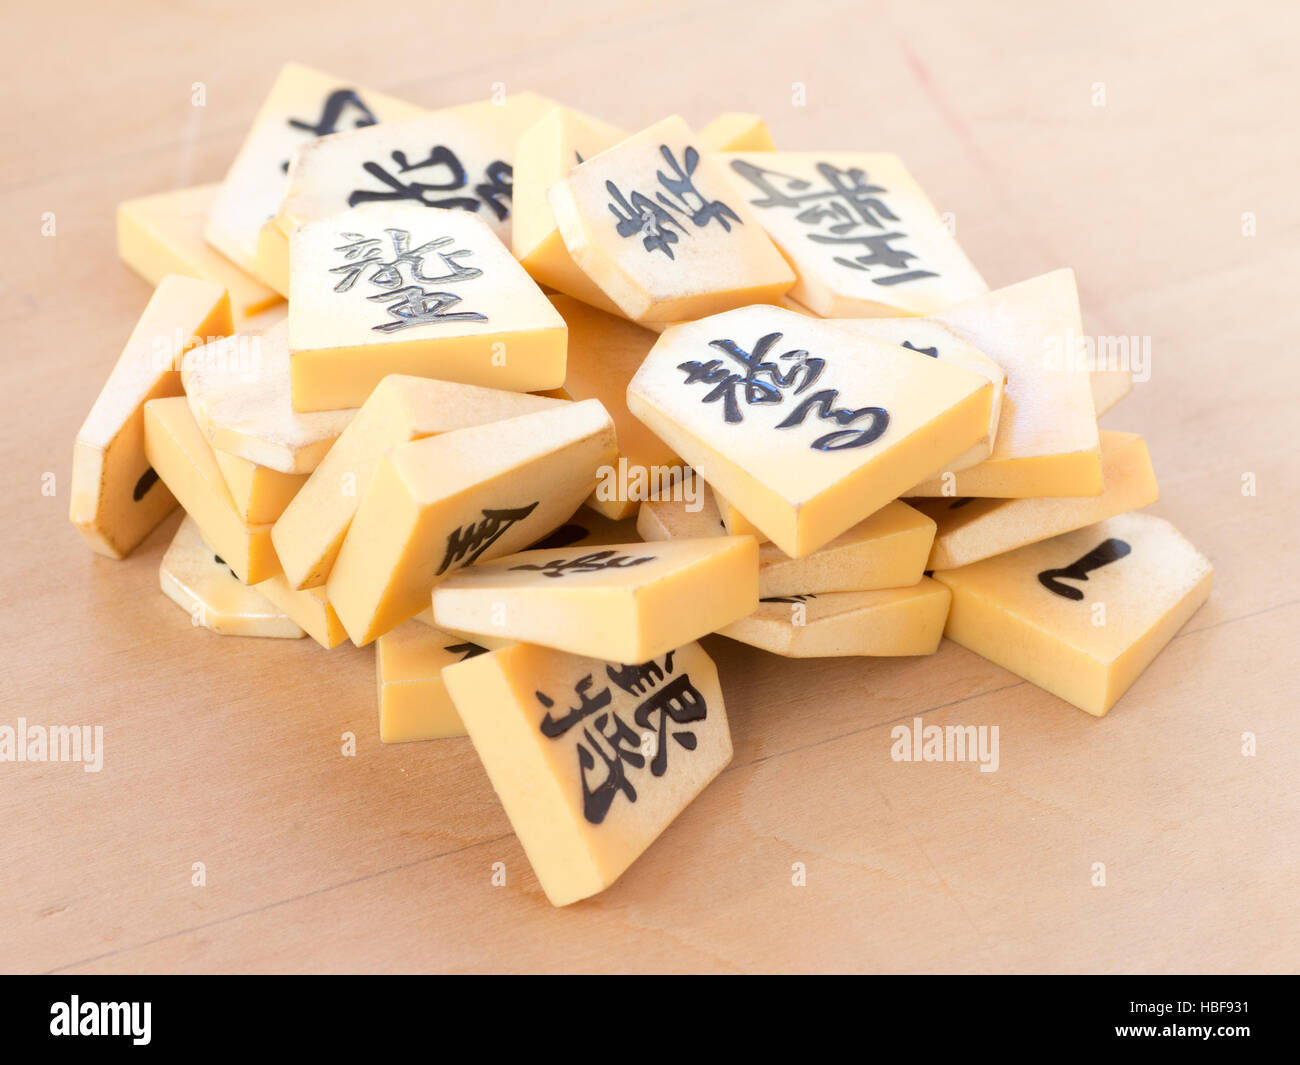 A pile of the Japanese chess pieces called Shogi, also known as a starting postion on a game called Shogi Kuzushi Stock Photo